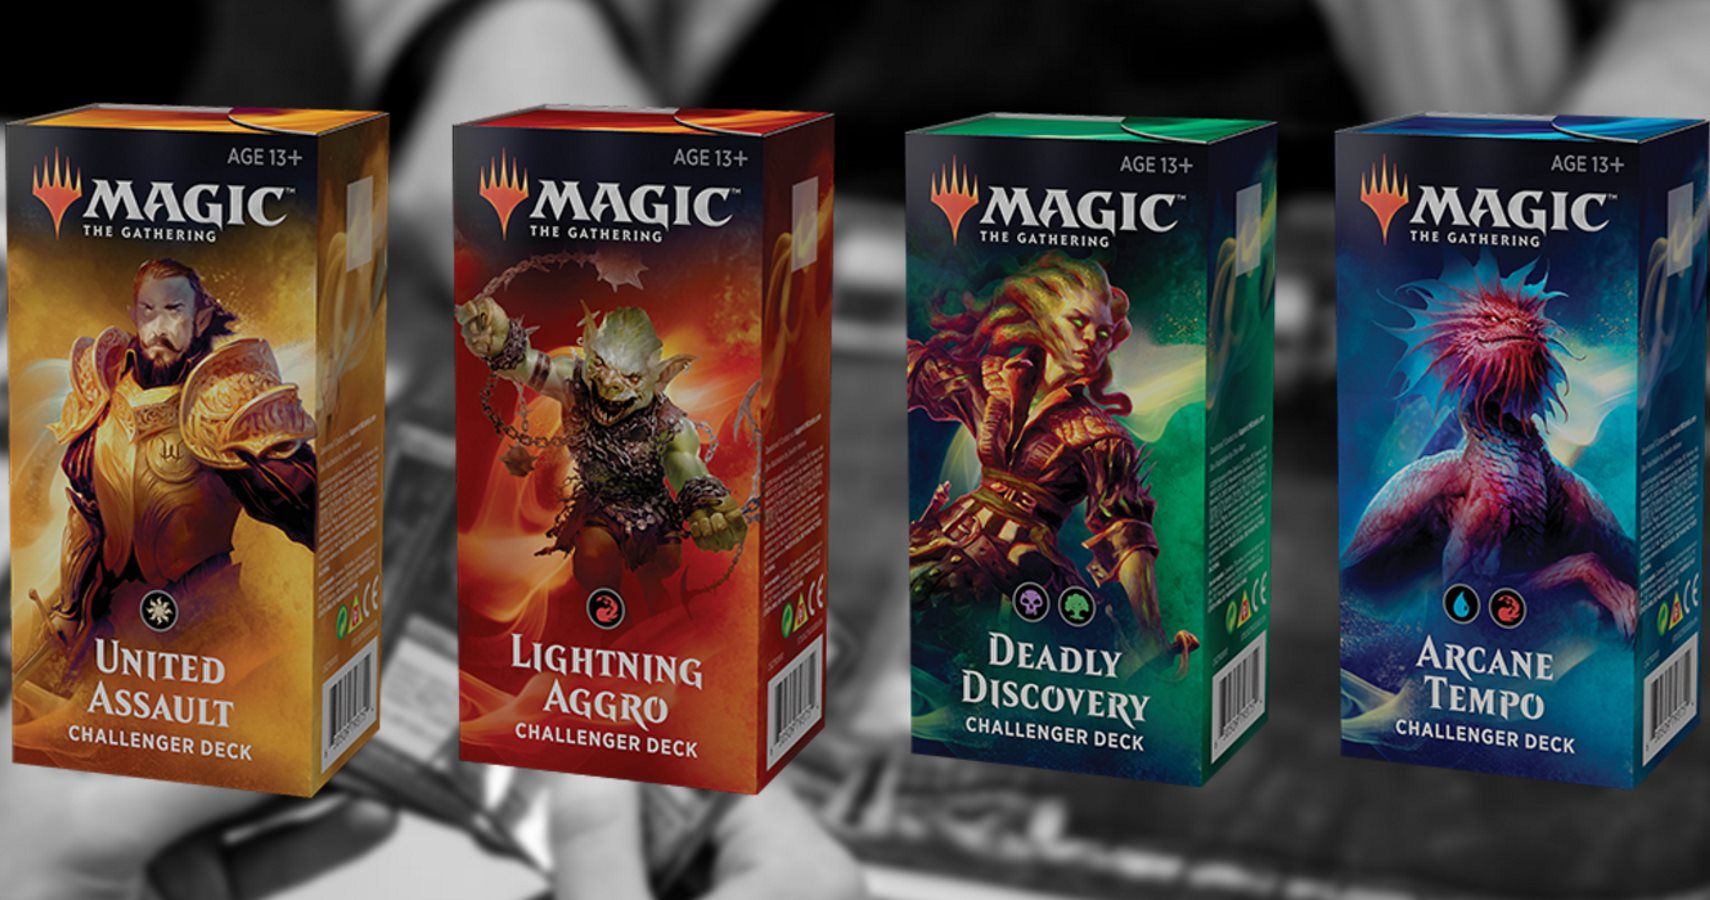 Magic: The Gathering's 2019 Challenger Decks: Which To Buy For Your Play Style